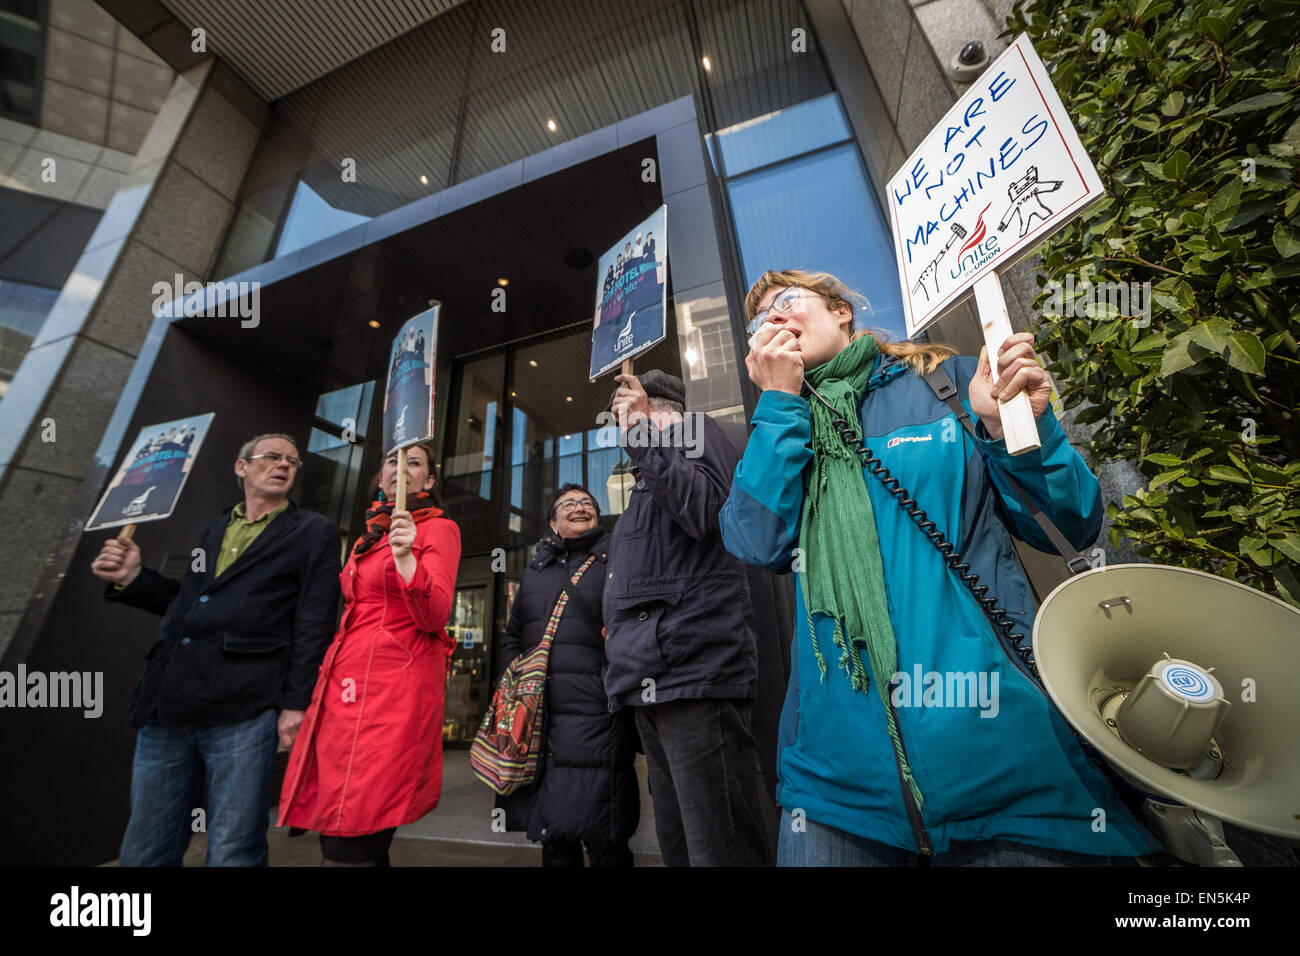 London, UK. 28th April, 2015. Workers Protest outside Hilton Metropole Hotel Credit:  Guy Corbishley/Alamy Live News Stock Photo